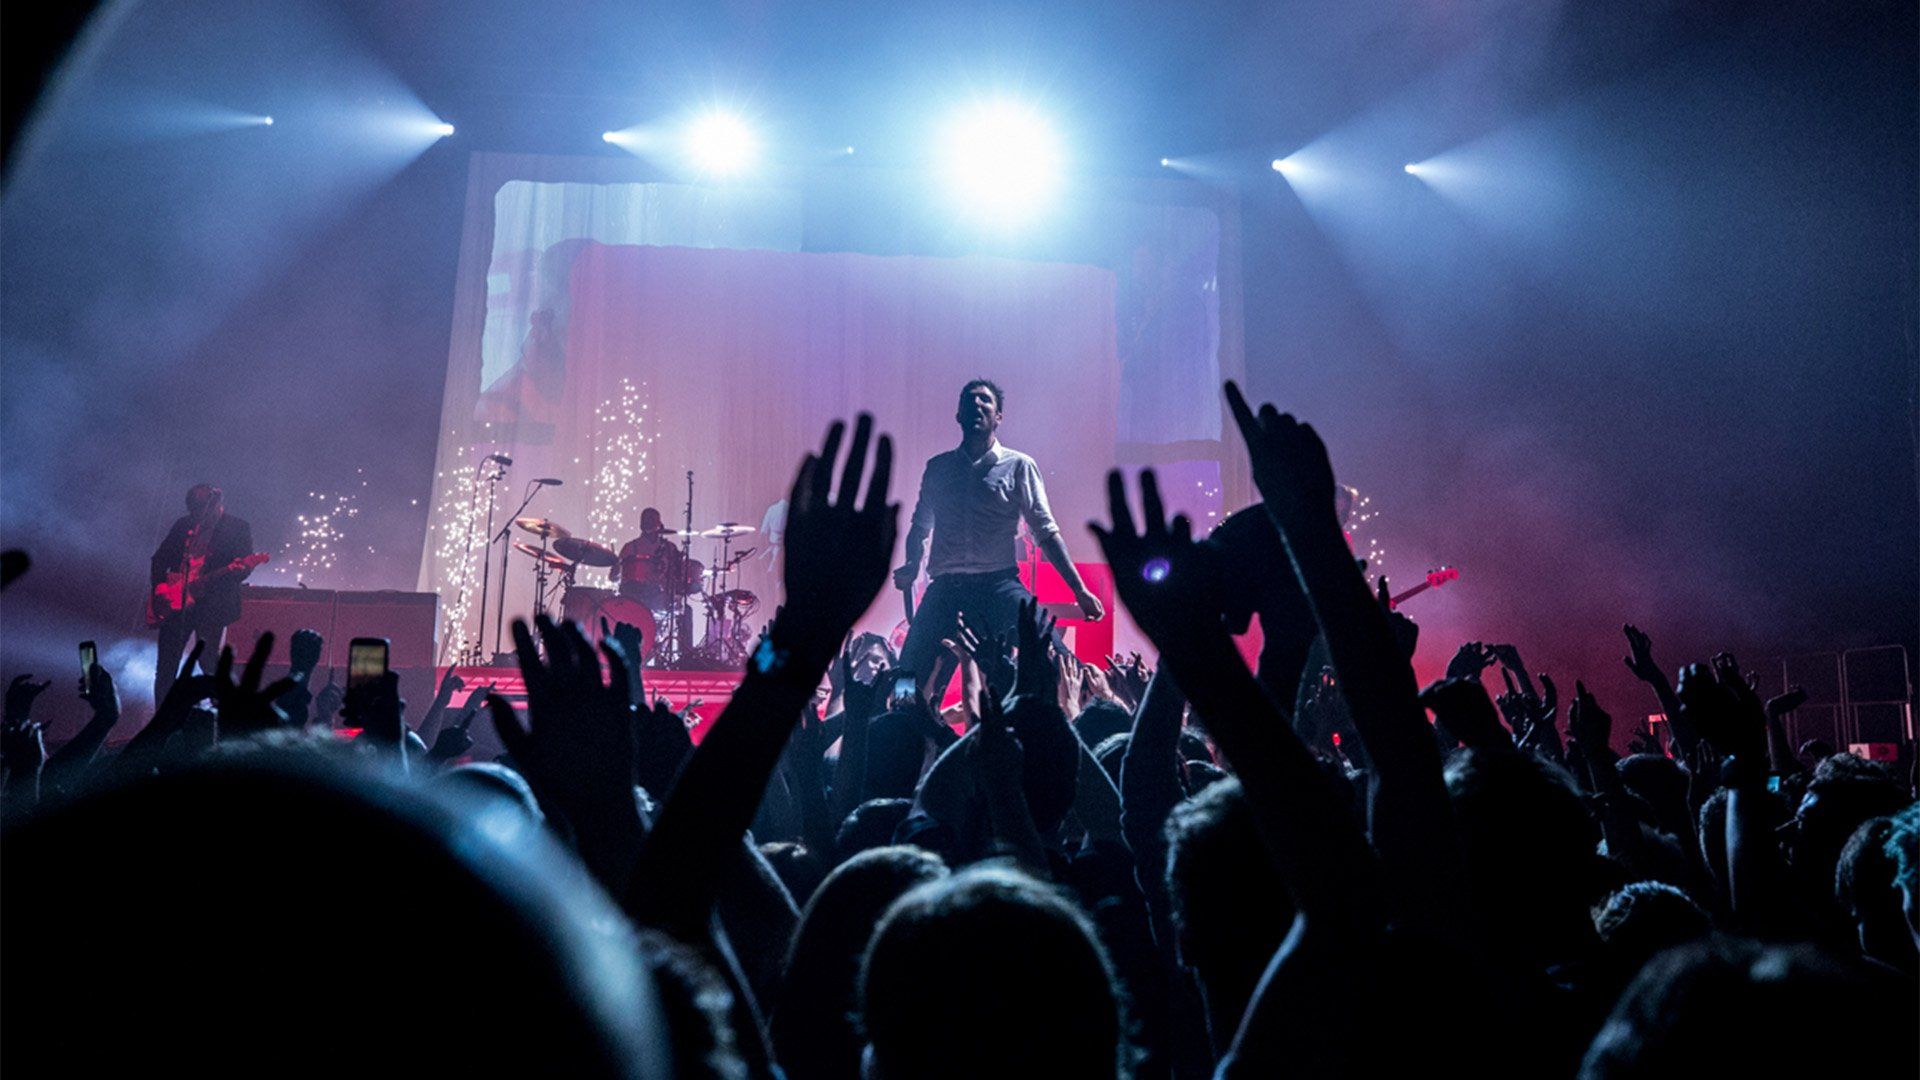 A band perform on stage, with audience hands waving and clapping. Photo by Ben Morse.